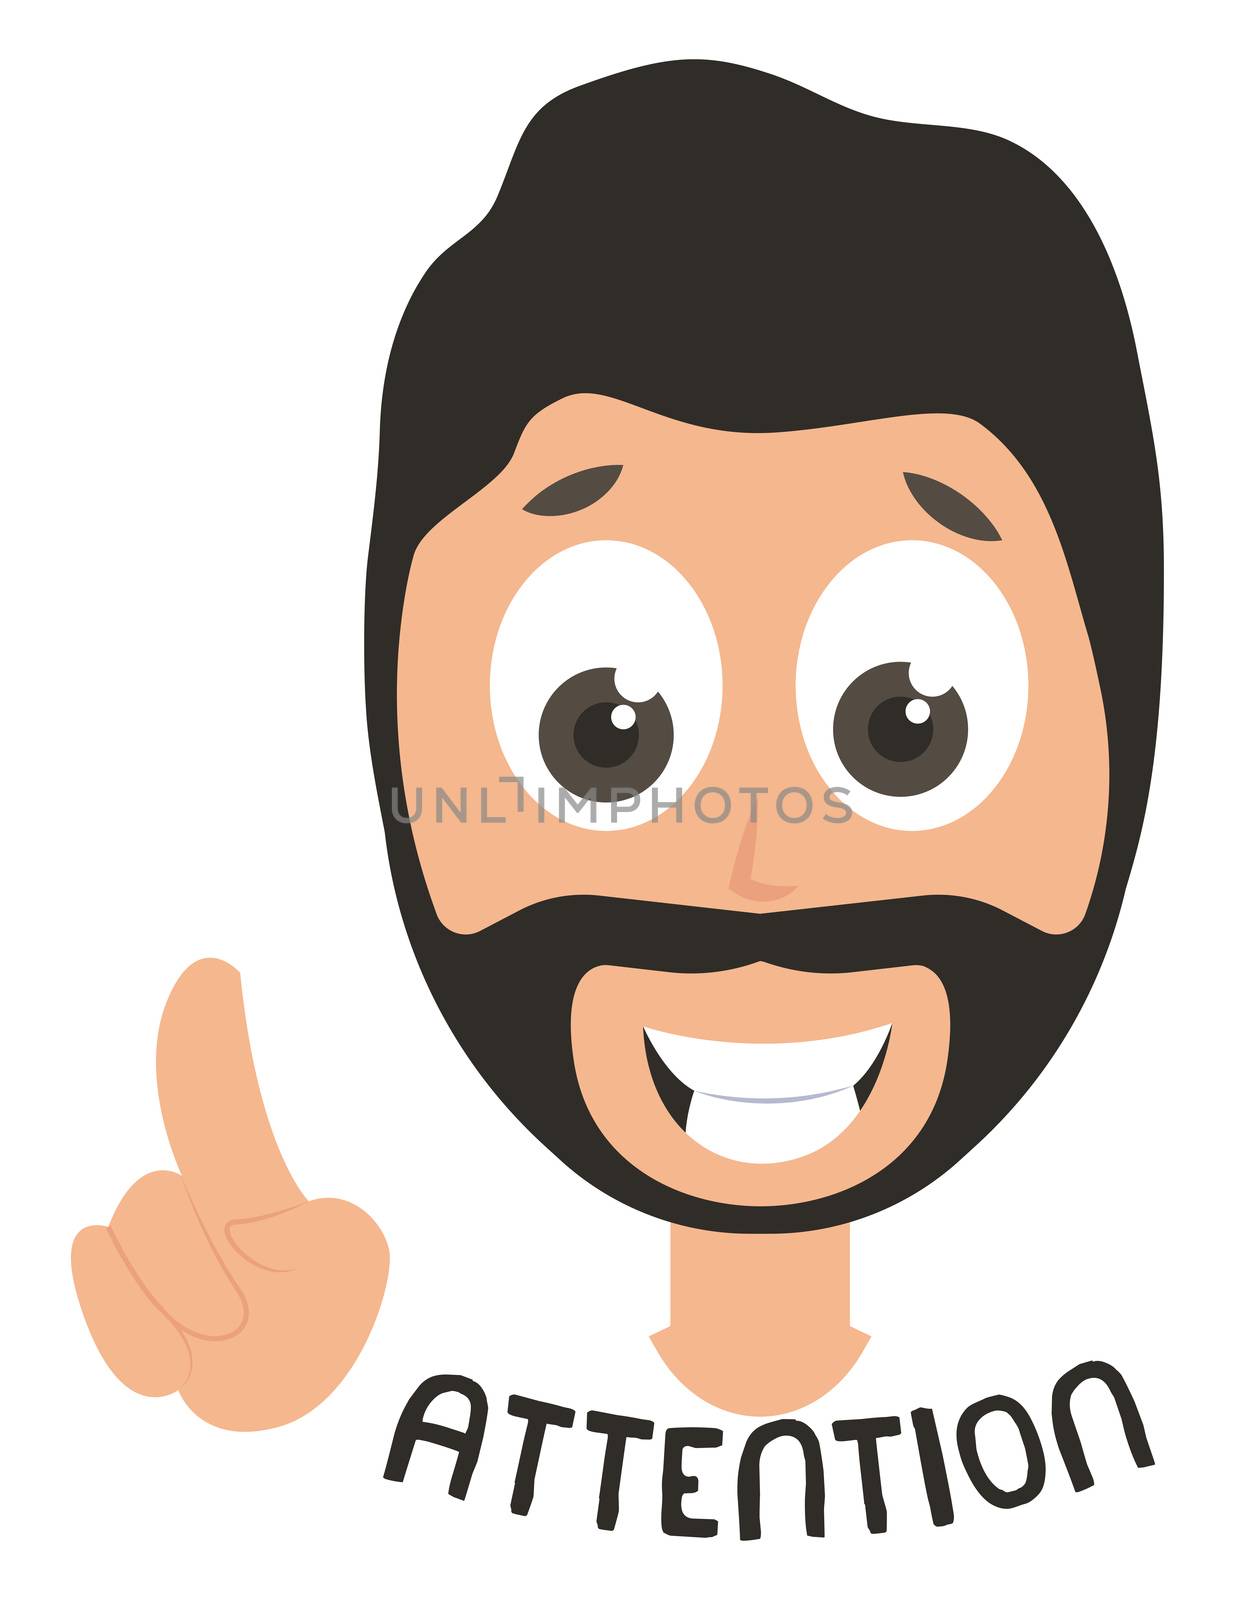 Man gives attention, illustration, vector on white background by Morphart